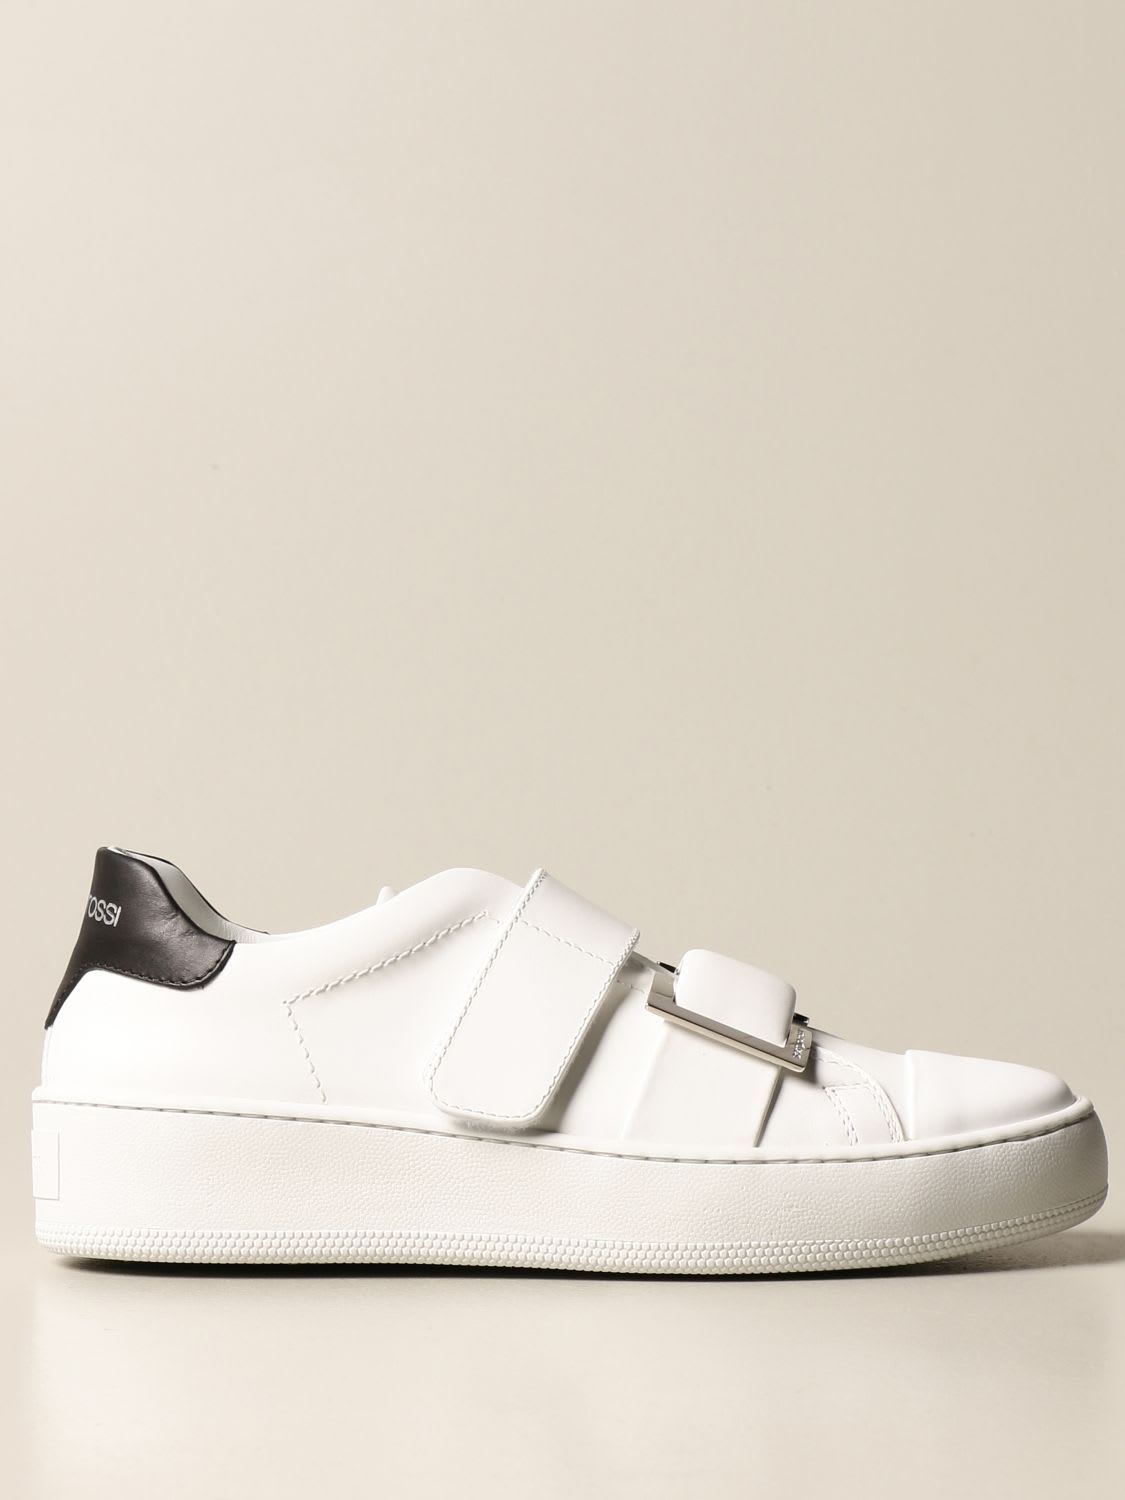 Buy Sergio Rossi Sneakers Twenty Sport Sergio Rossi Sneakers In Leather online, shop Sergio Rossi shoes with free shipping